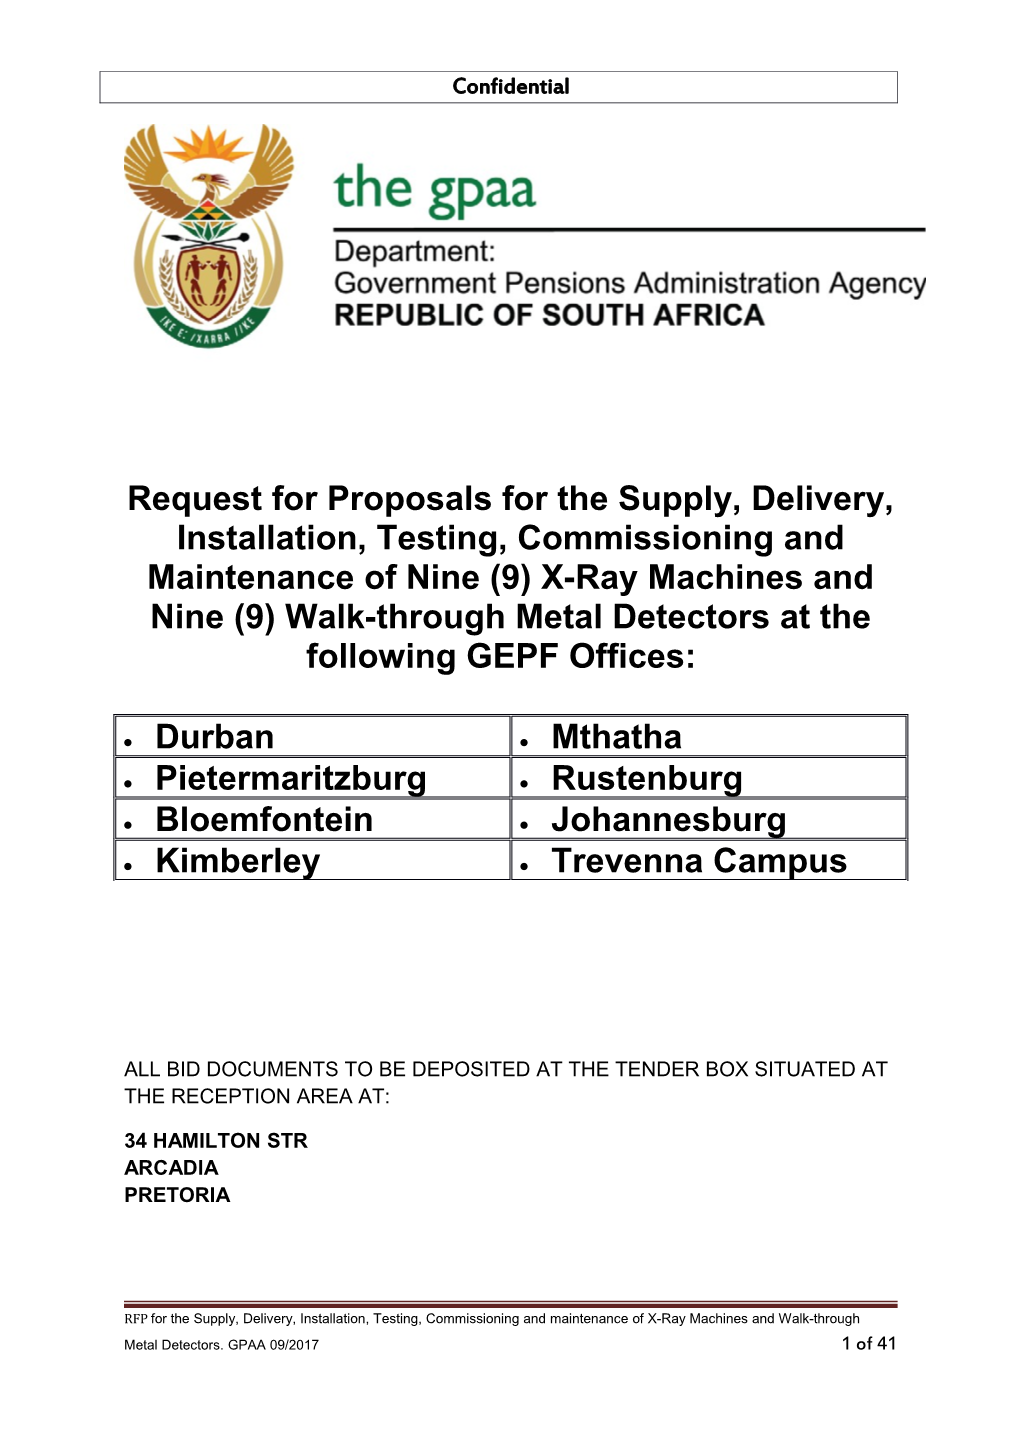 Request for Proposals for the Supply, Delivery, Installation, Testing, Commissioning And